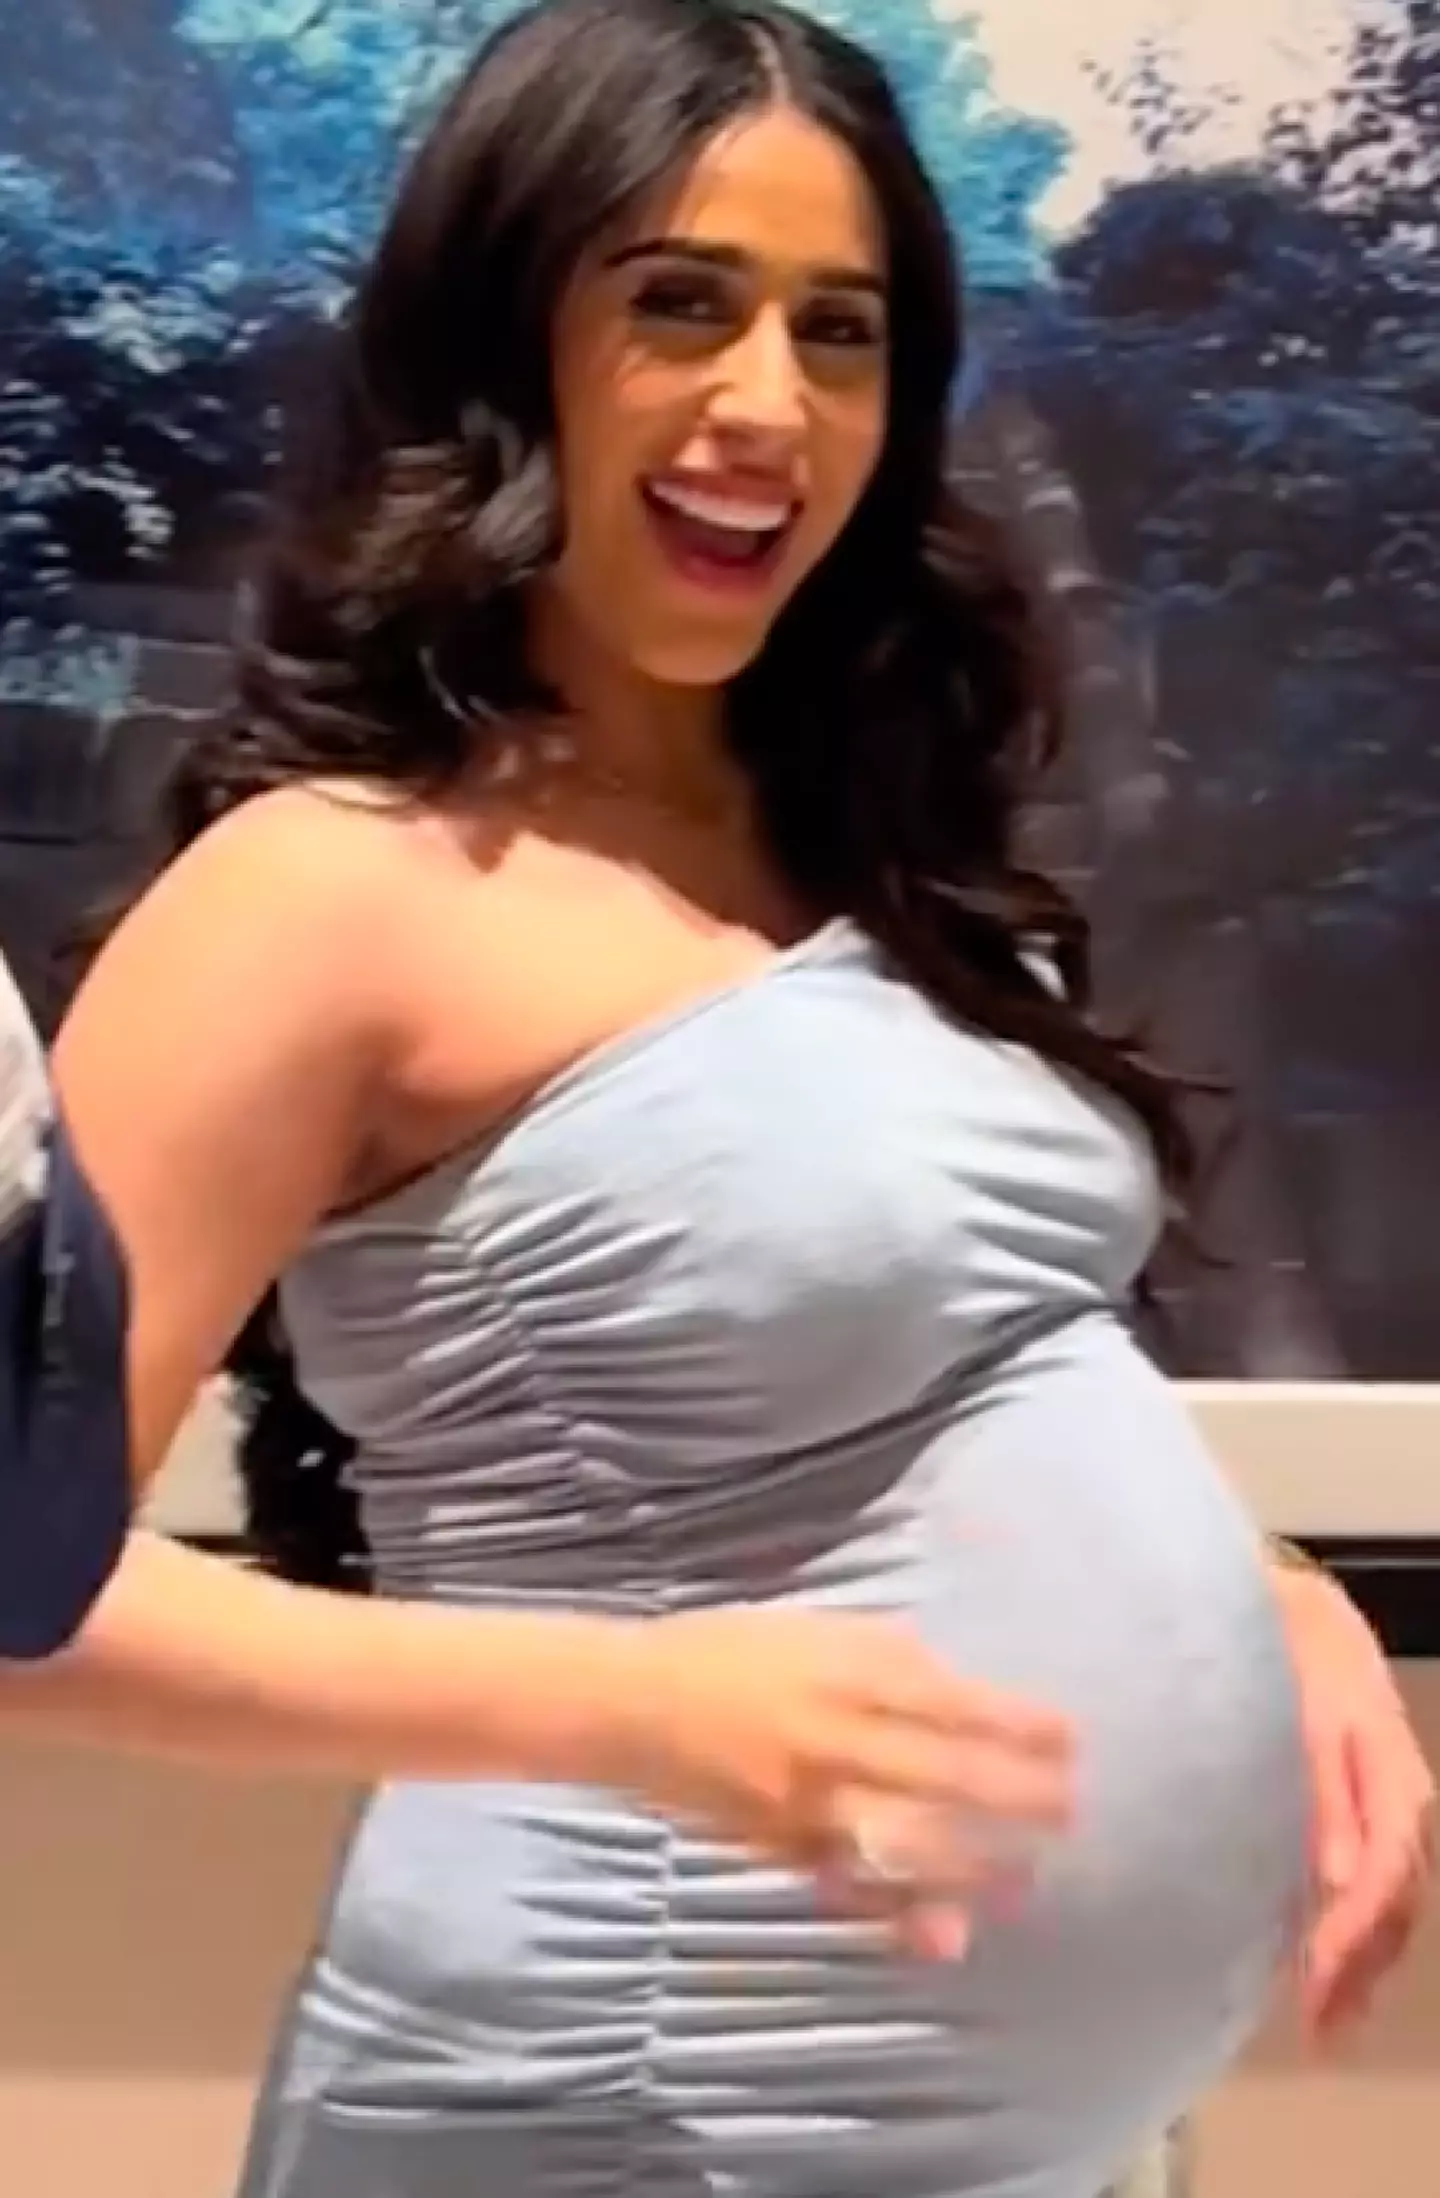 Linda Andrade is nine months pregnant.